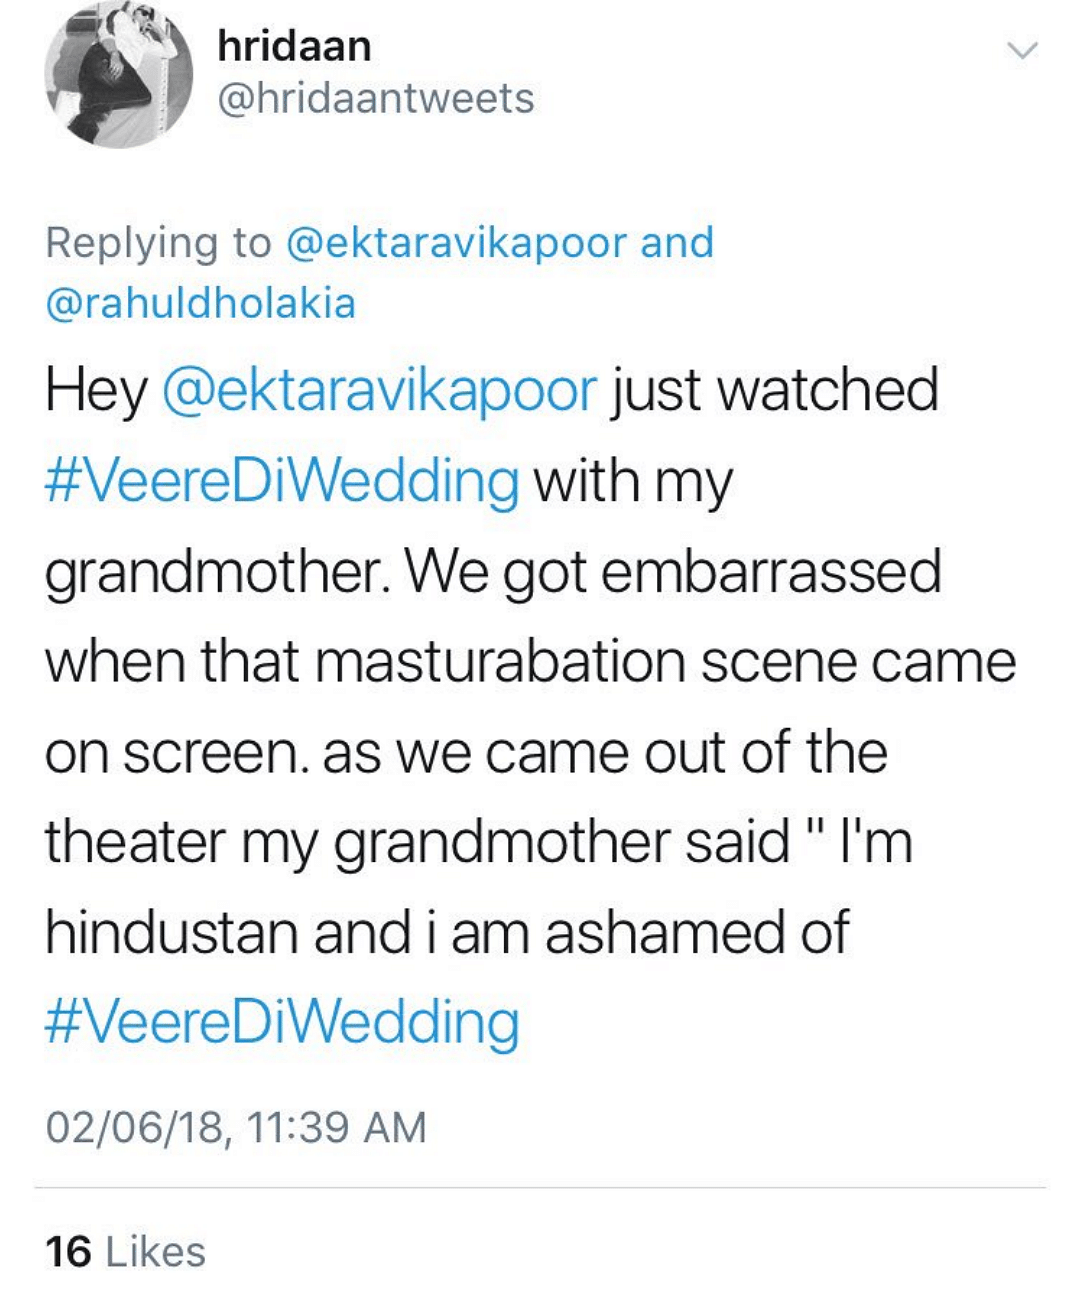 After the release of the film, curious similarly worded tweets on scandalised grandmothers started showing up. 